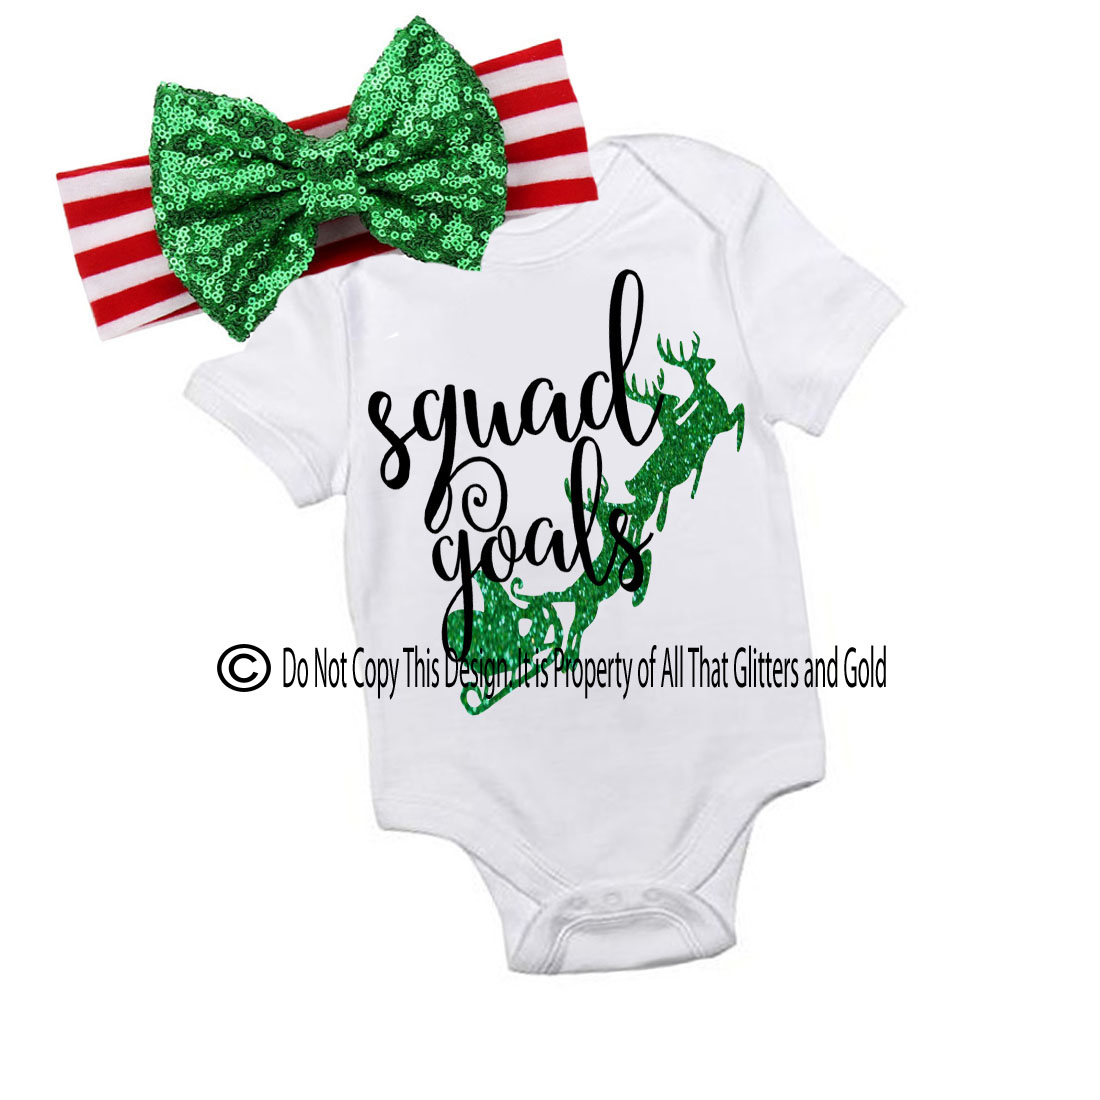 Glitter Squad Goals New Handmade Christmas Outfit For Baby Girls and Little Girls